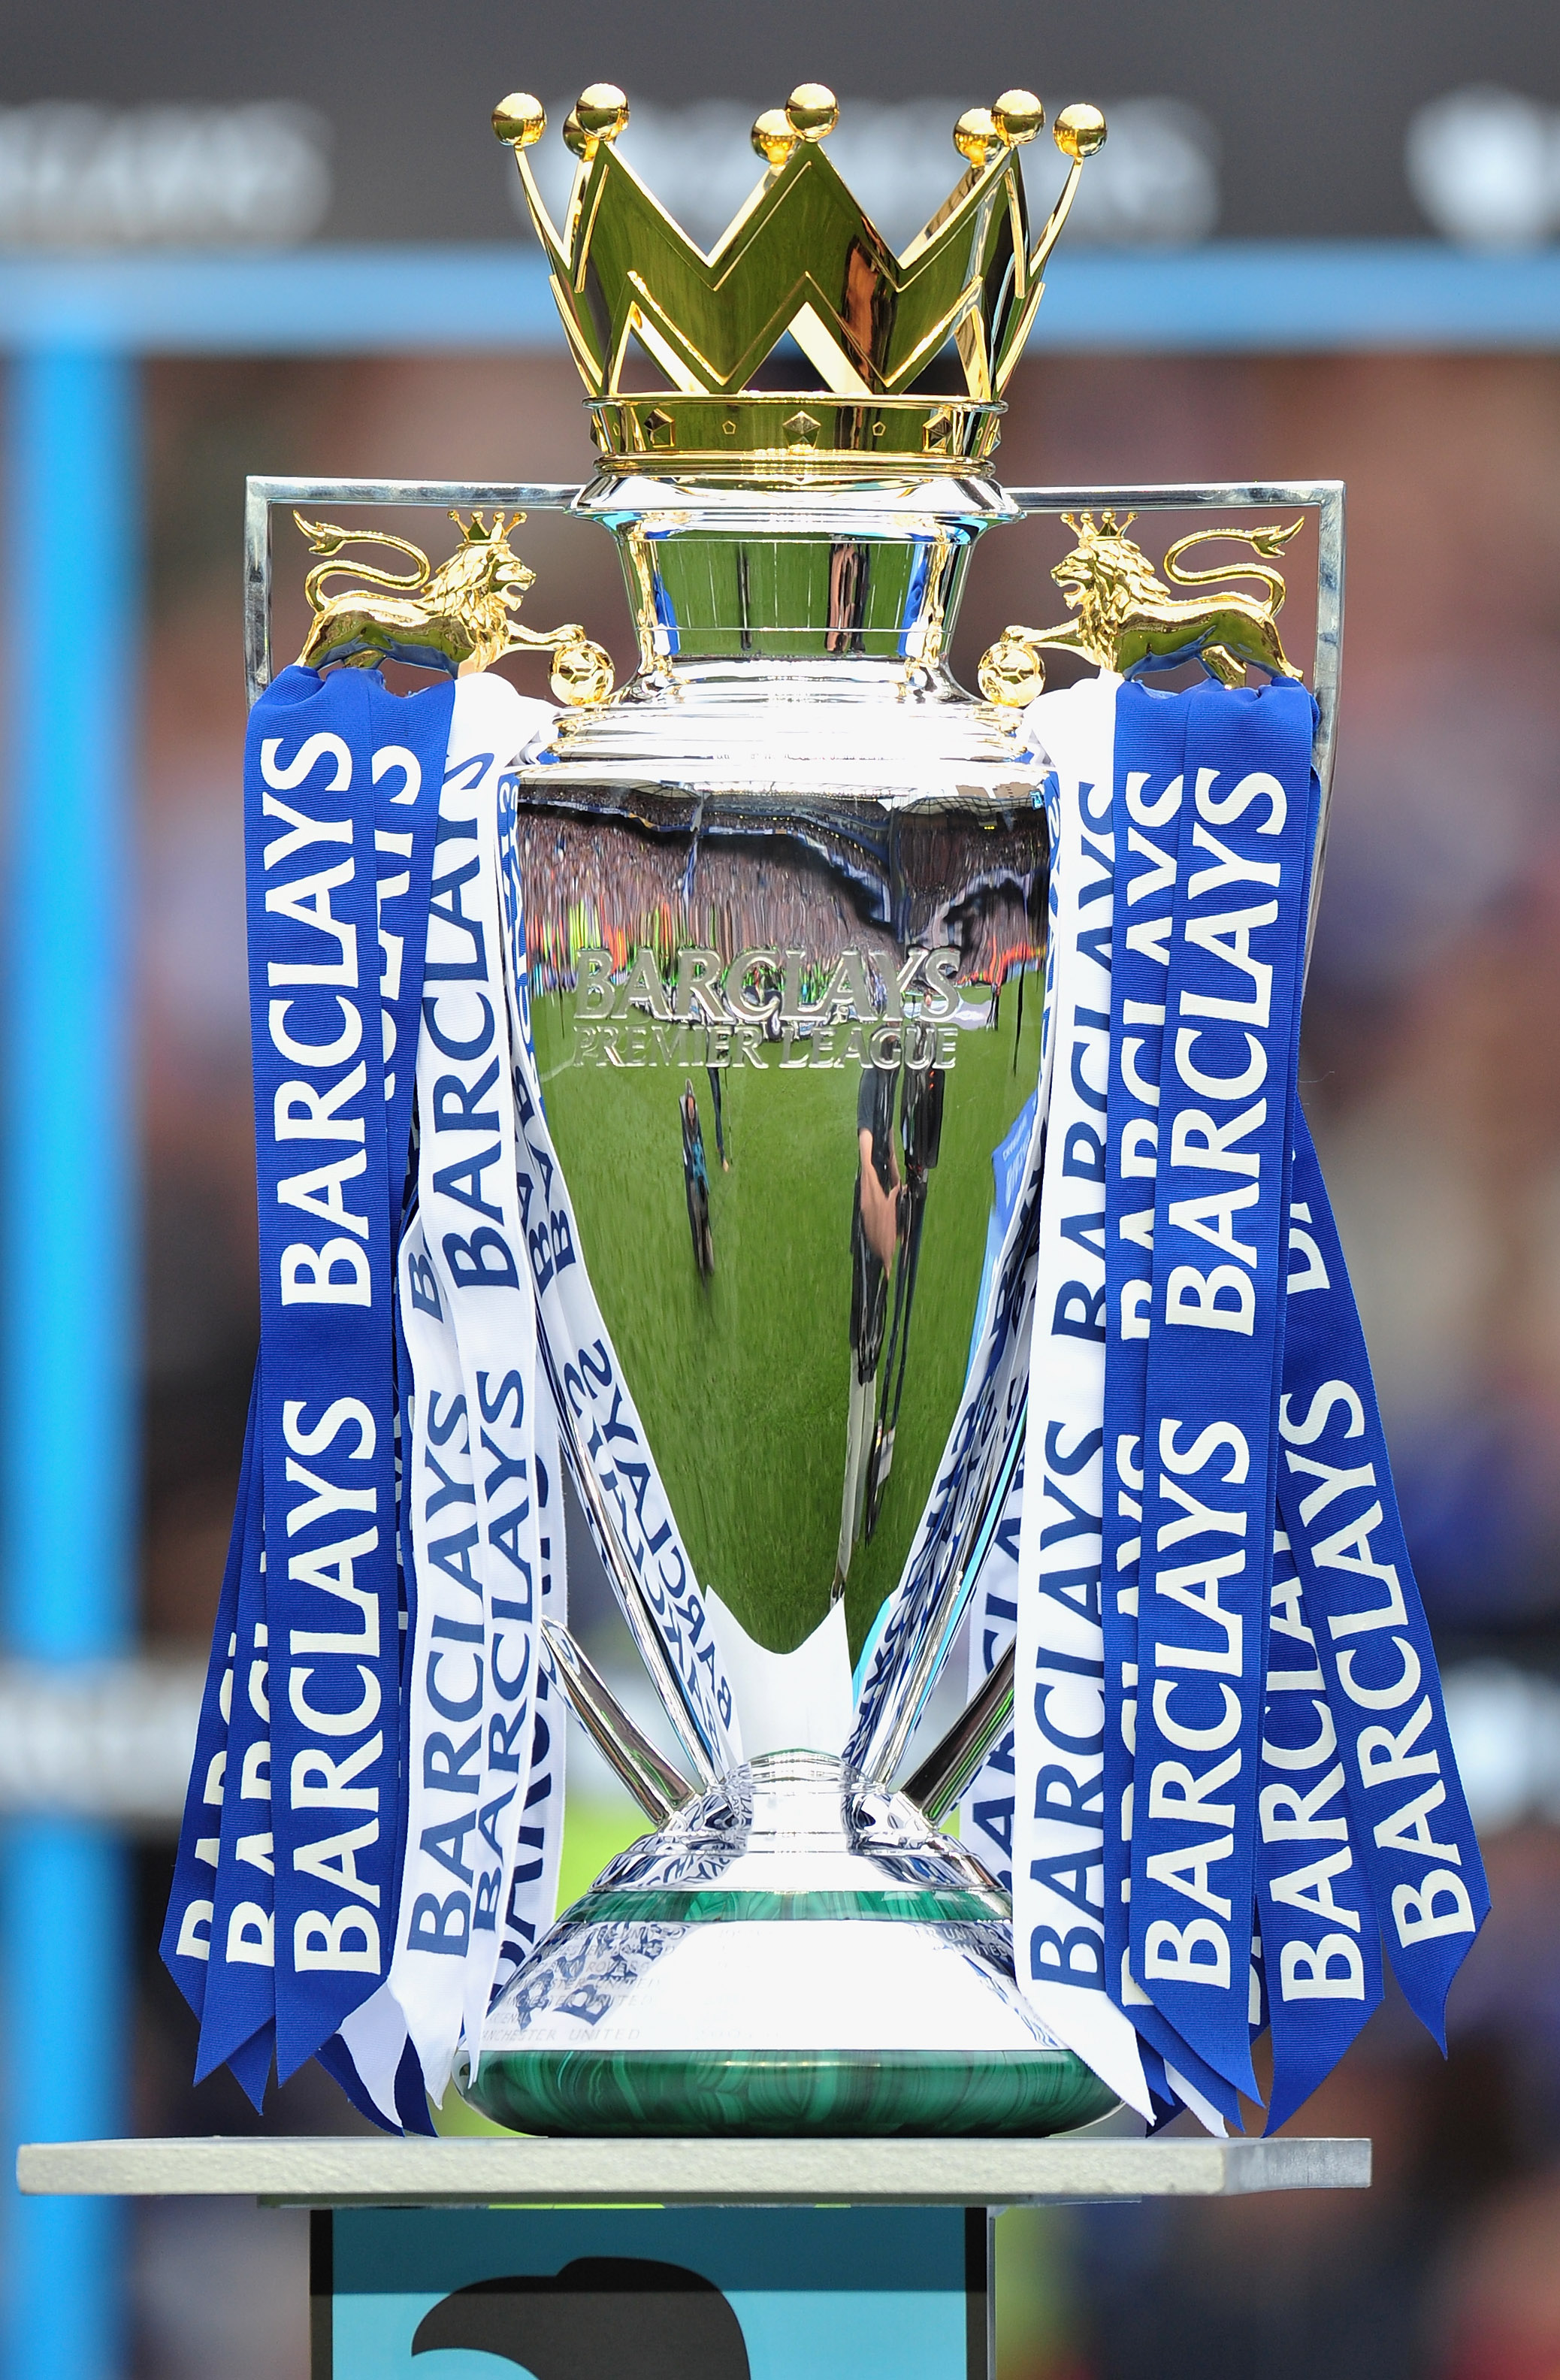 LONDON, ENGLAND - MAY 09:  A view of the Premier League trophy after the Barclays Premier League match between Chelsea and Wigan Athletic at Stamford Bridge on May 9, 2010 in London, England. Chelsea won 8-0 to win the championship.  (Photo by Clive Mason